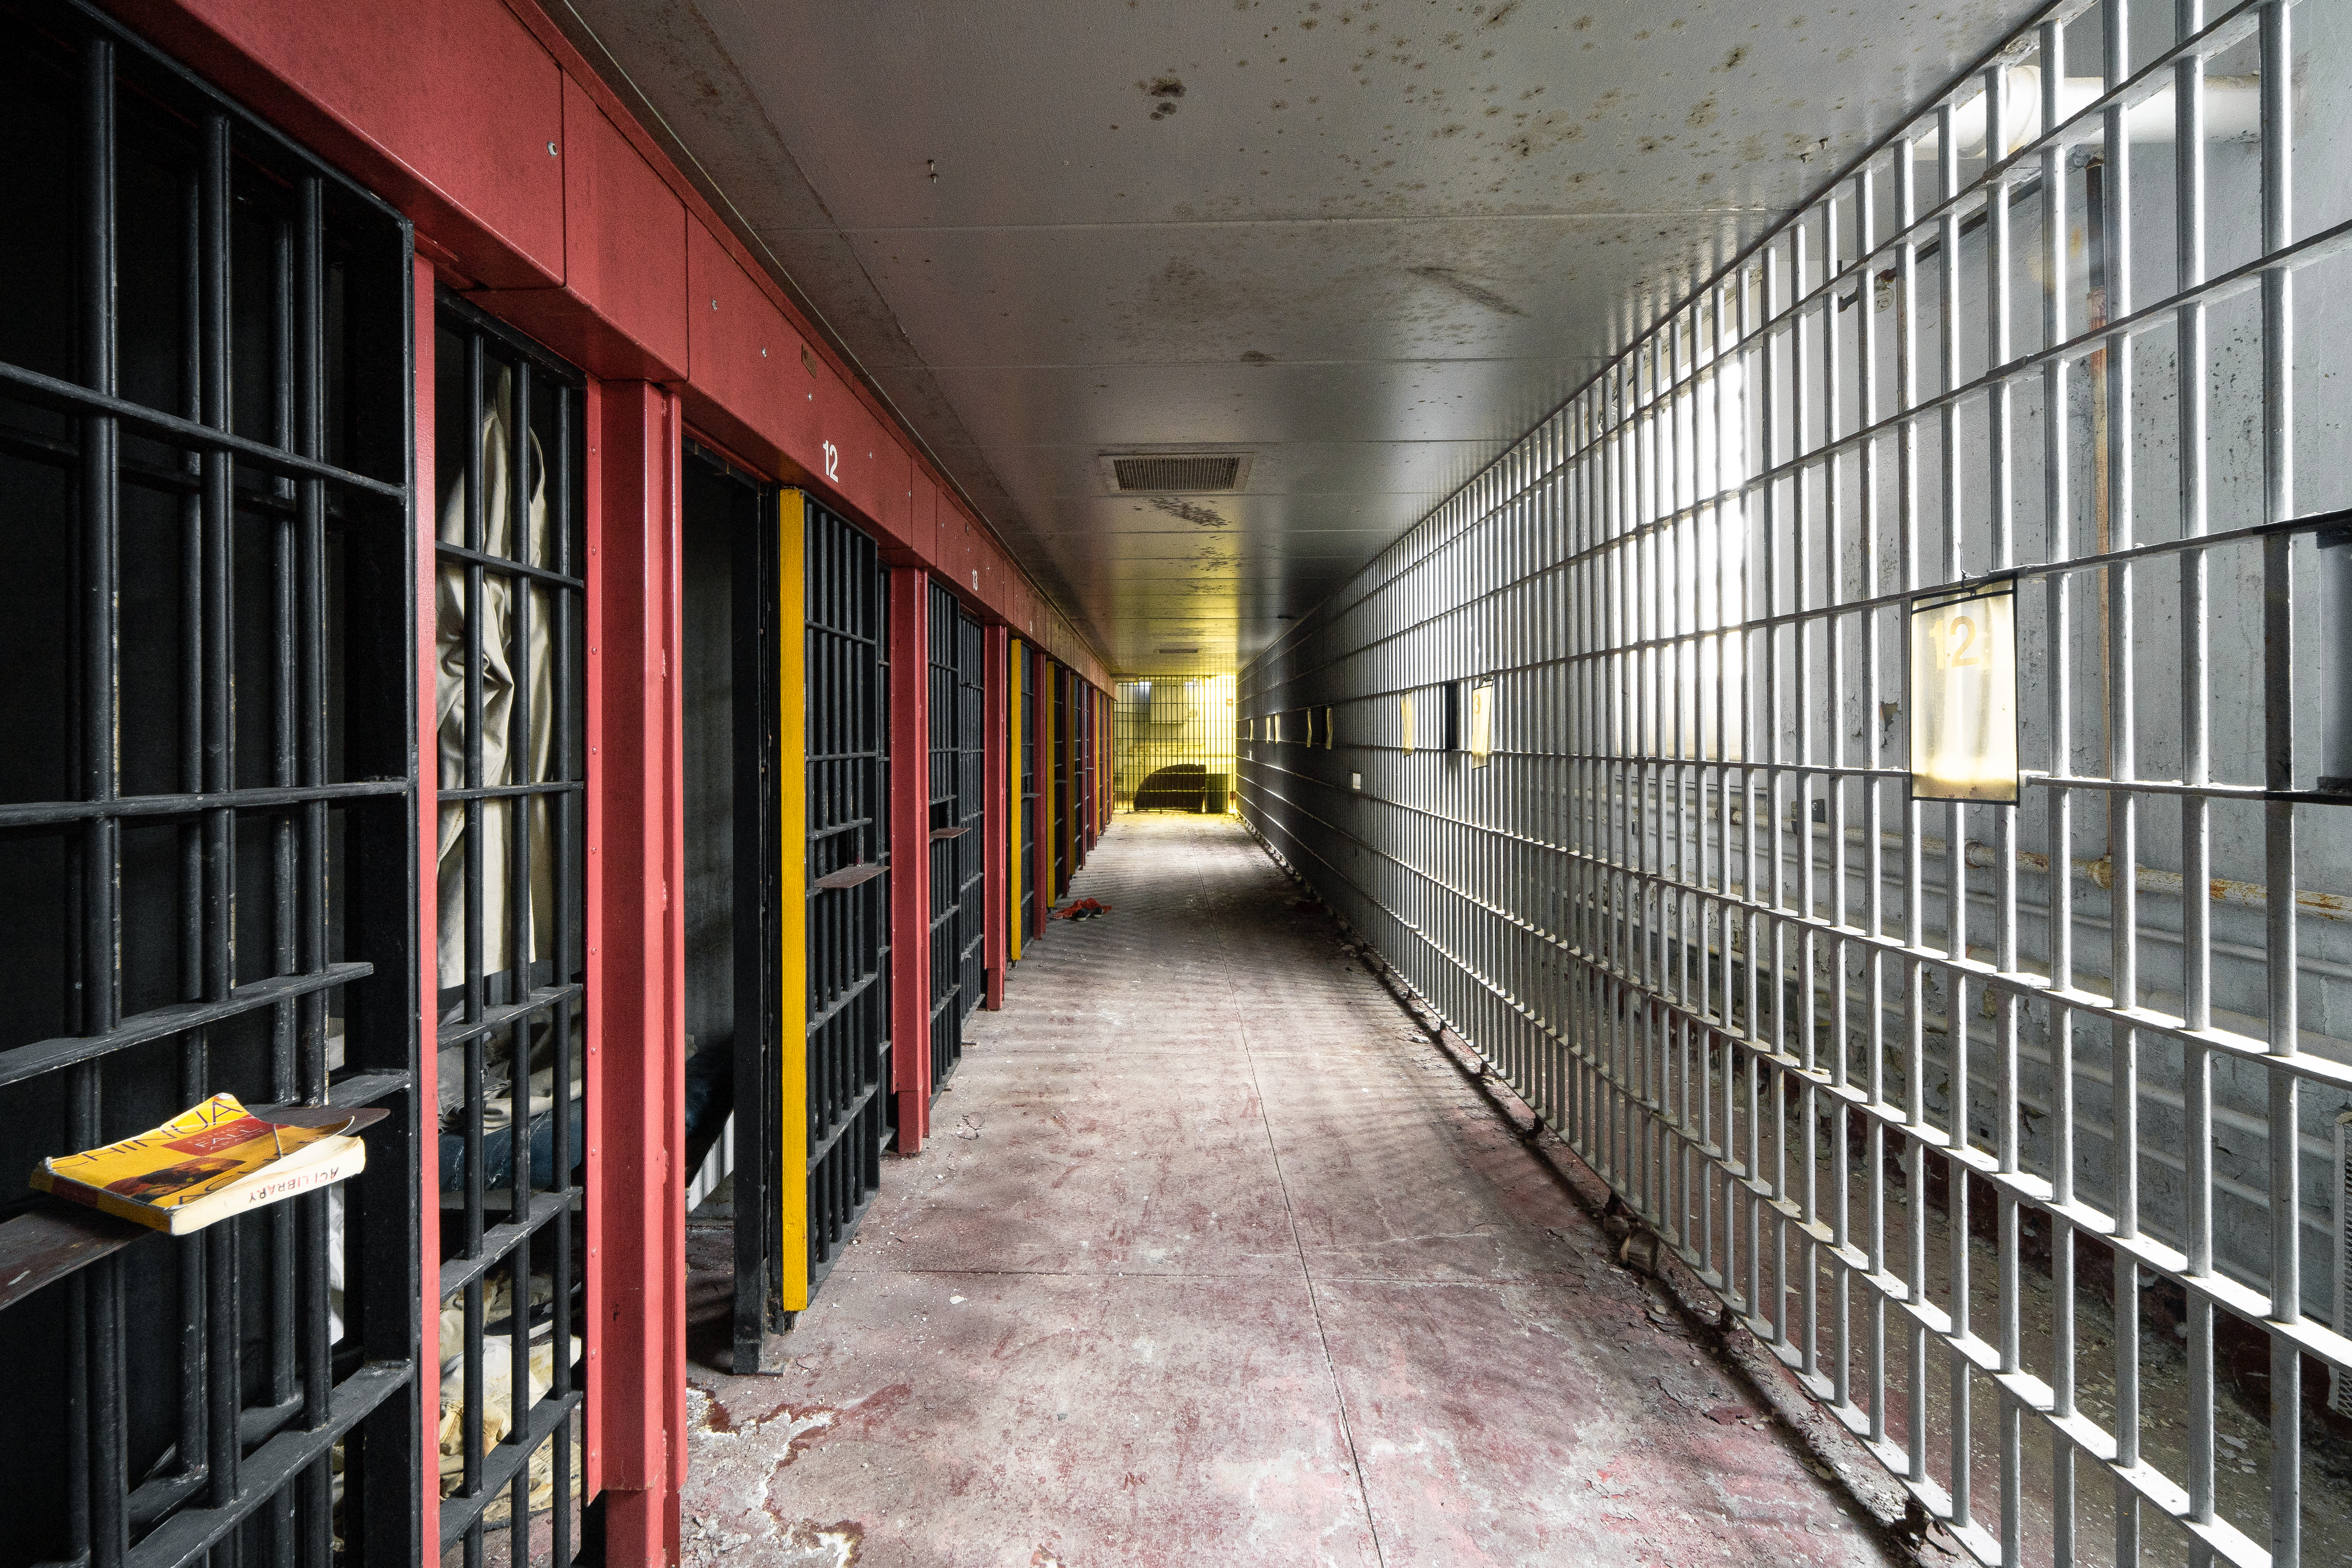 Vacant holding cells in a disused correctional facility in Rhode Island.
